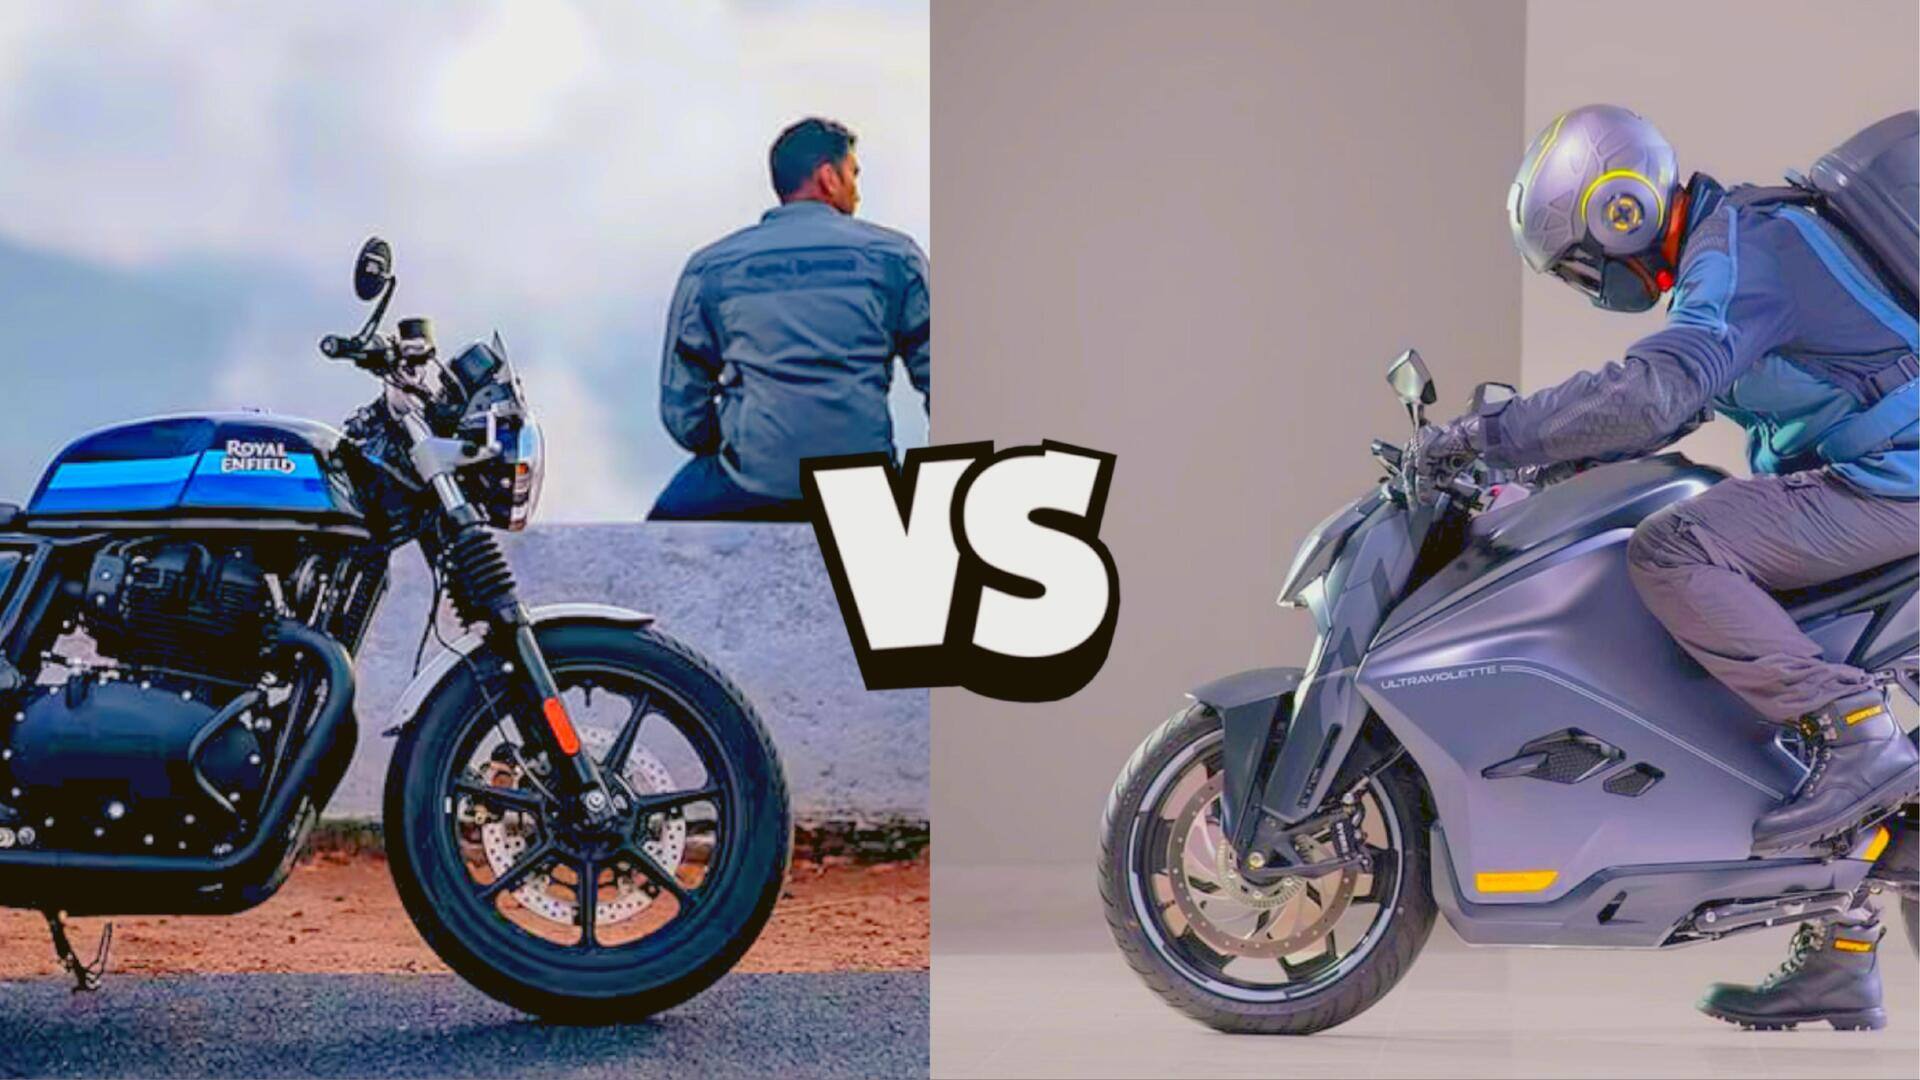 Is Ultraviolette F77 better than Royal Enfield Continental GT 650